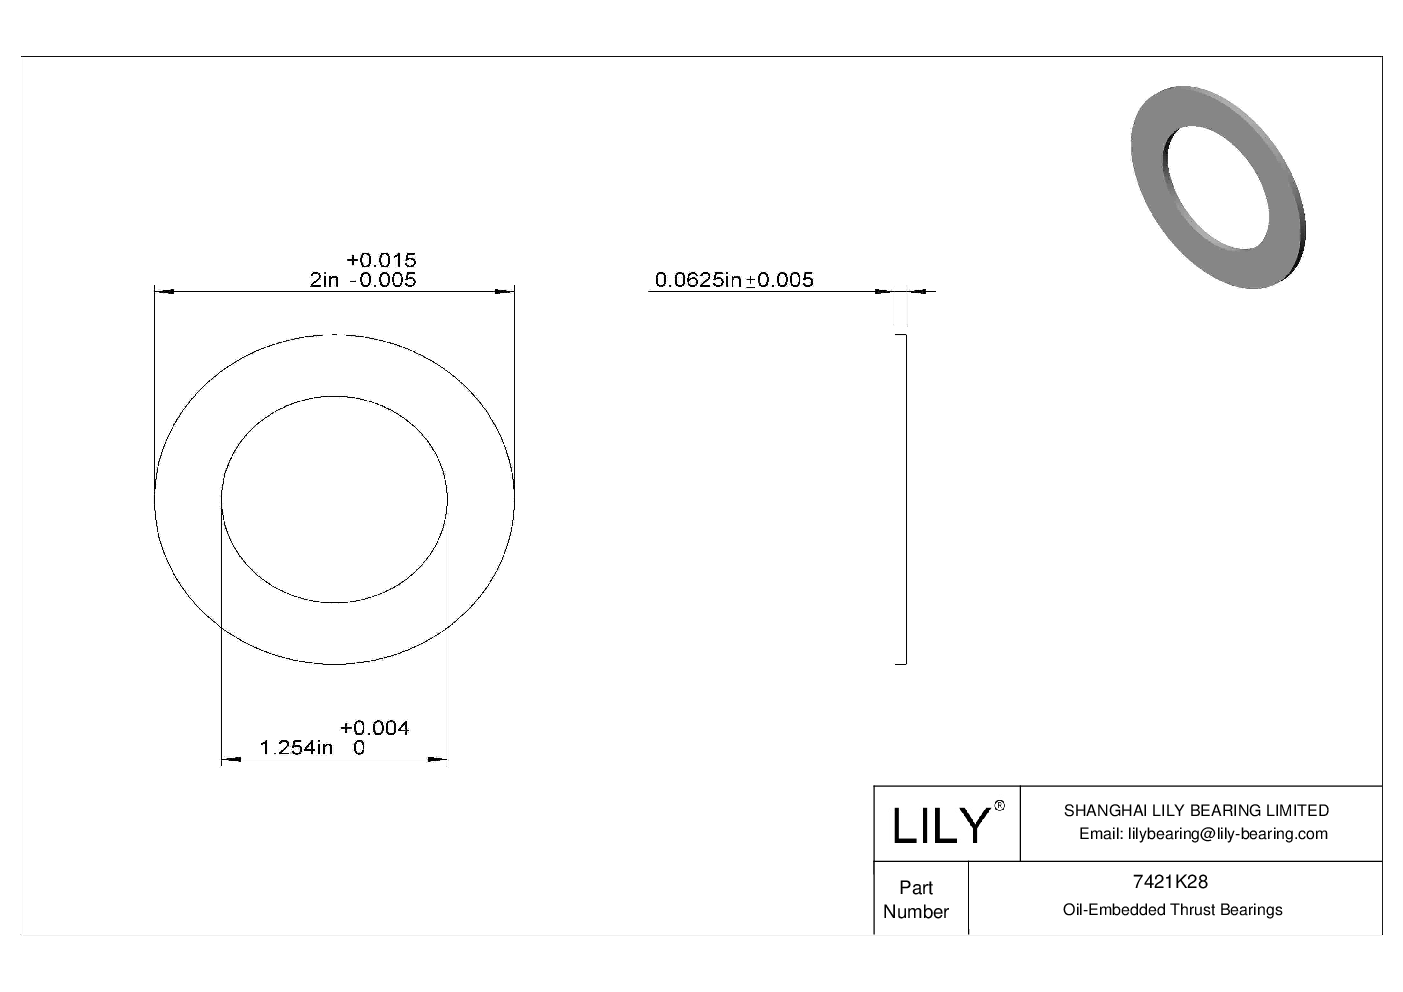 HECBKCI Ultra-Low-Friction Oil-Embedded Thrust Bearings cad drawing